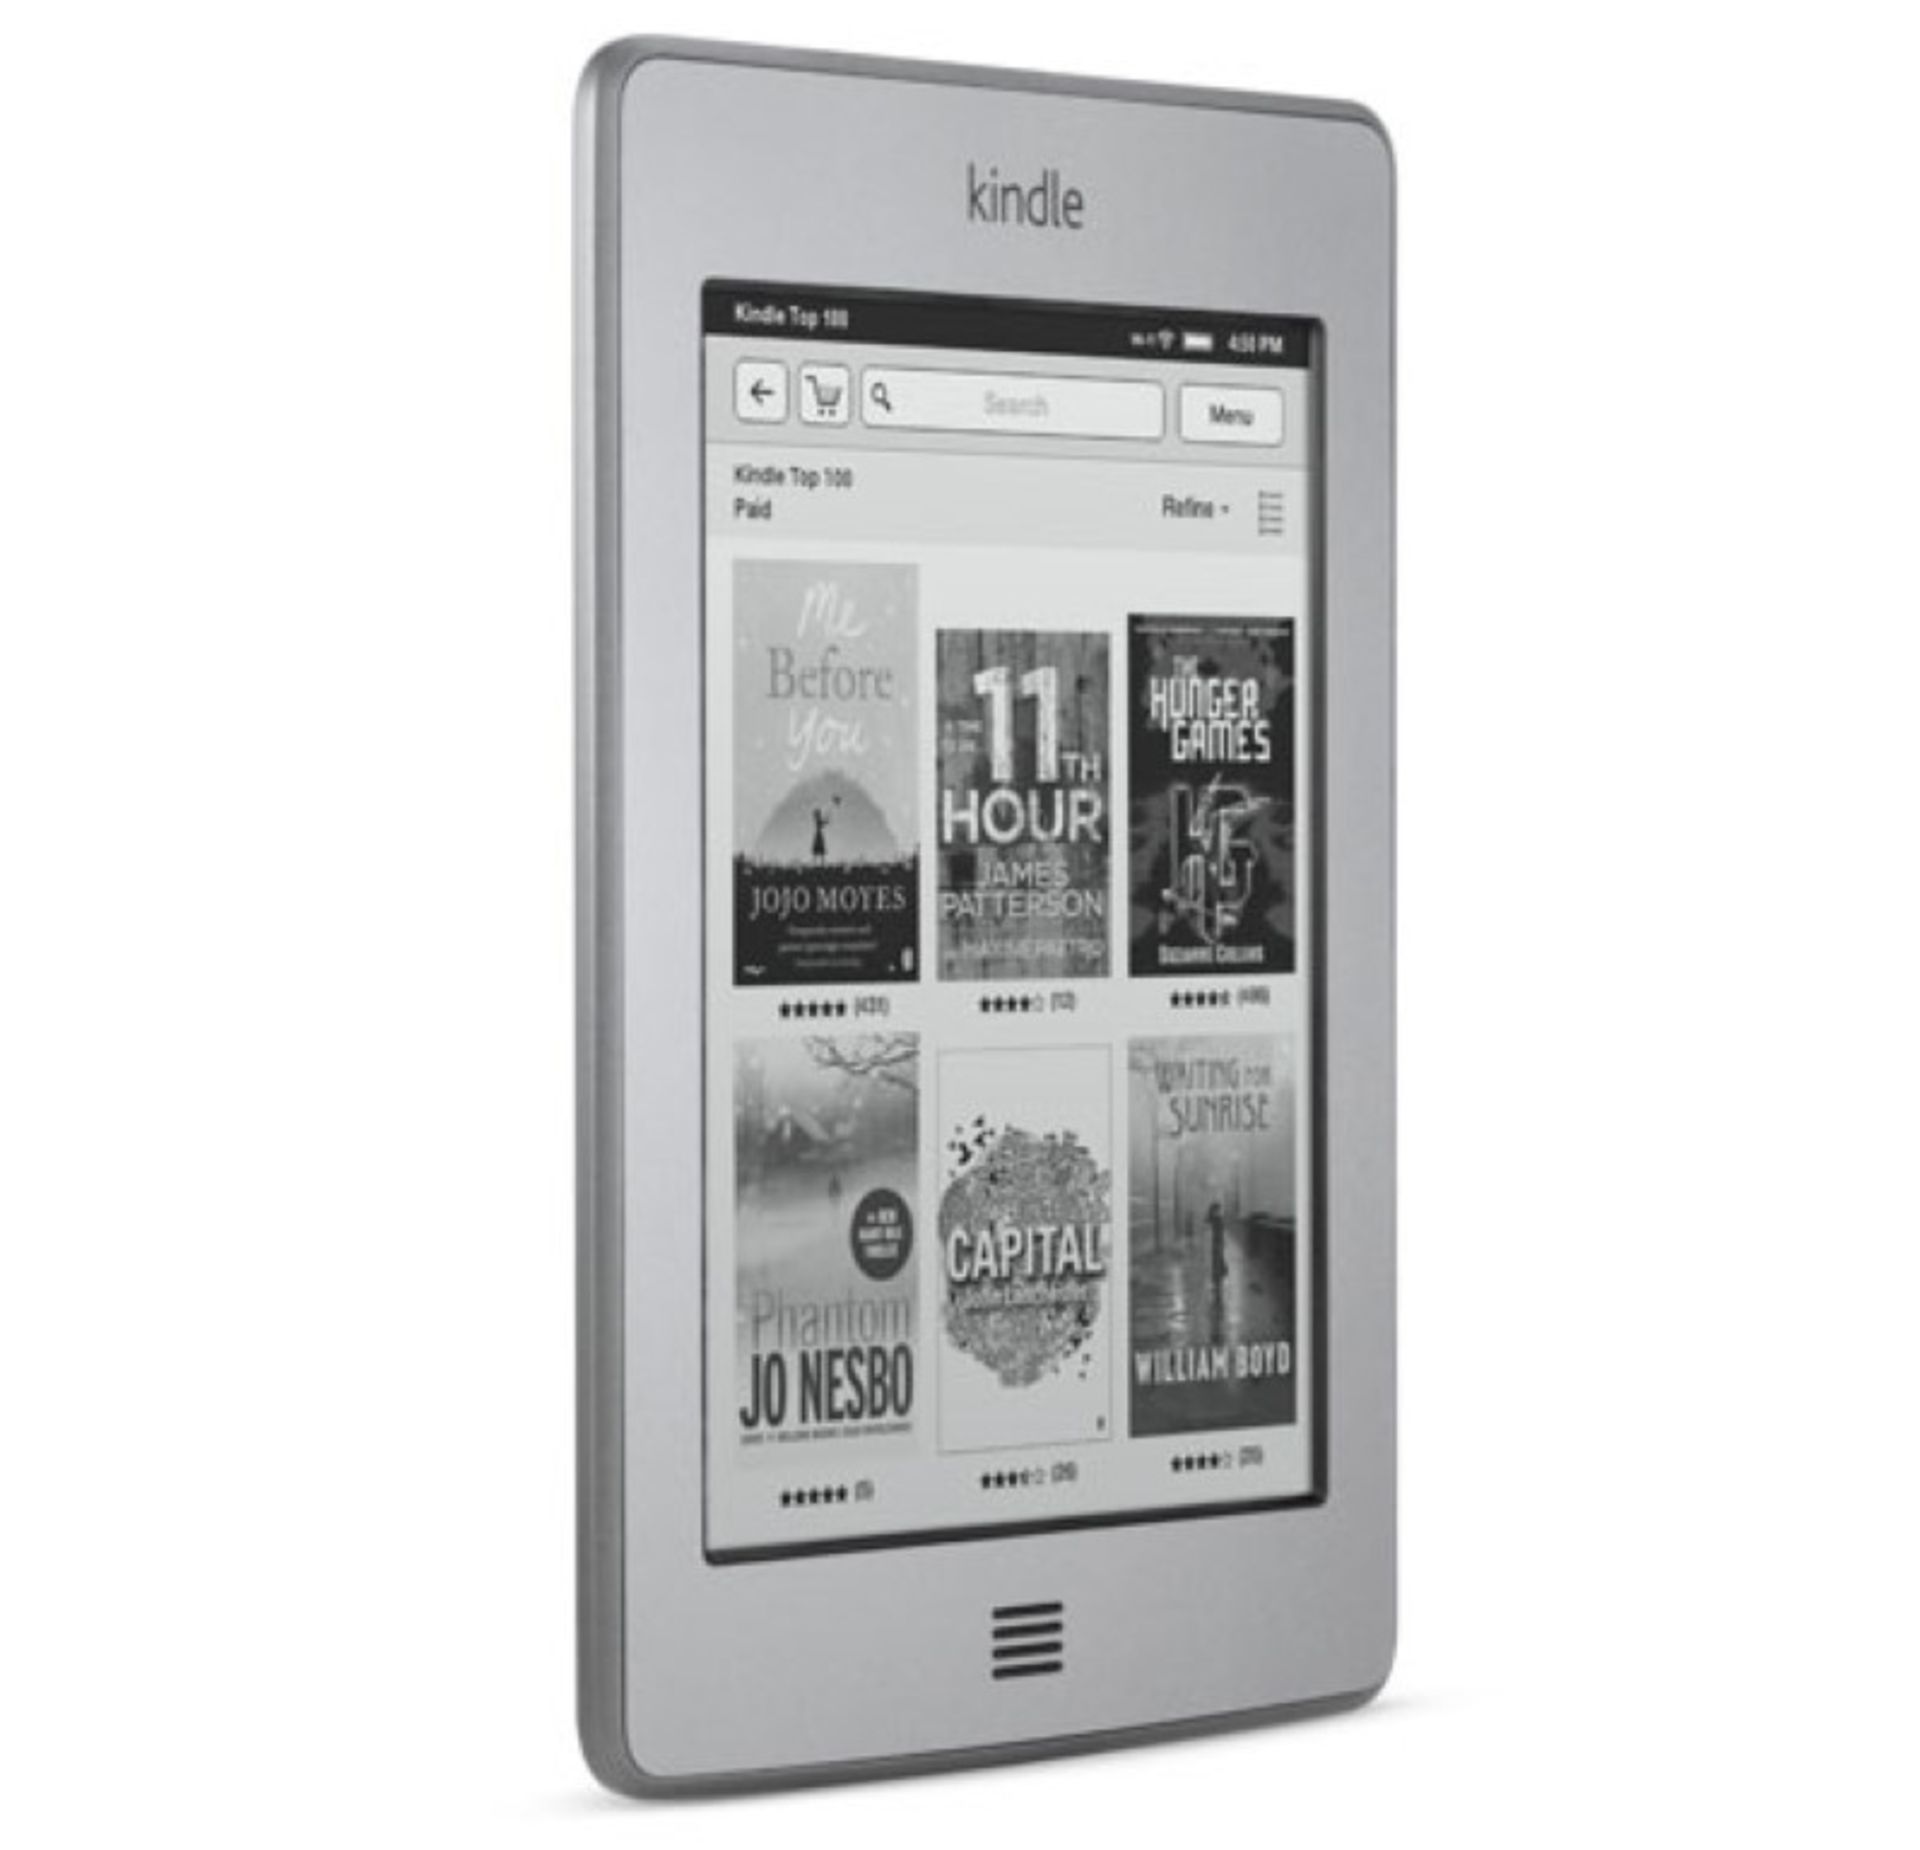 1 x Amazon Kindle Touch, With Audio and Wi-Fi, 6" E Ink Touch Screen Display - Simple-to-use -